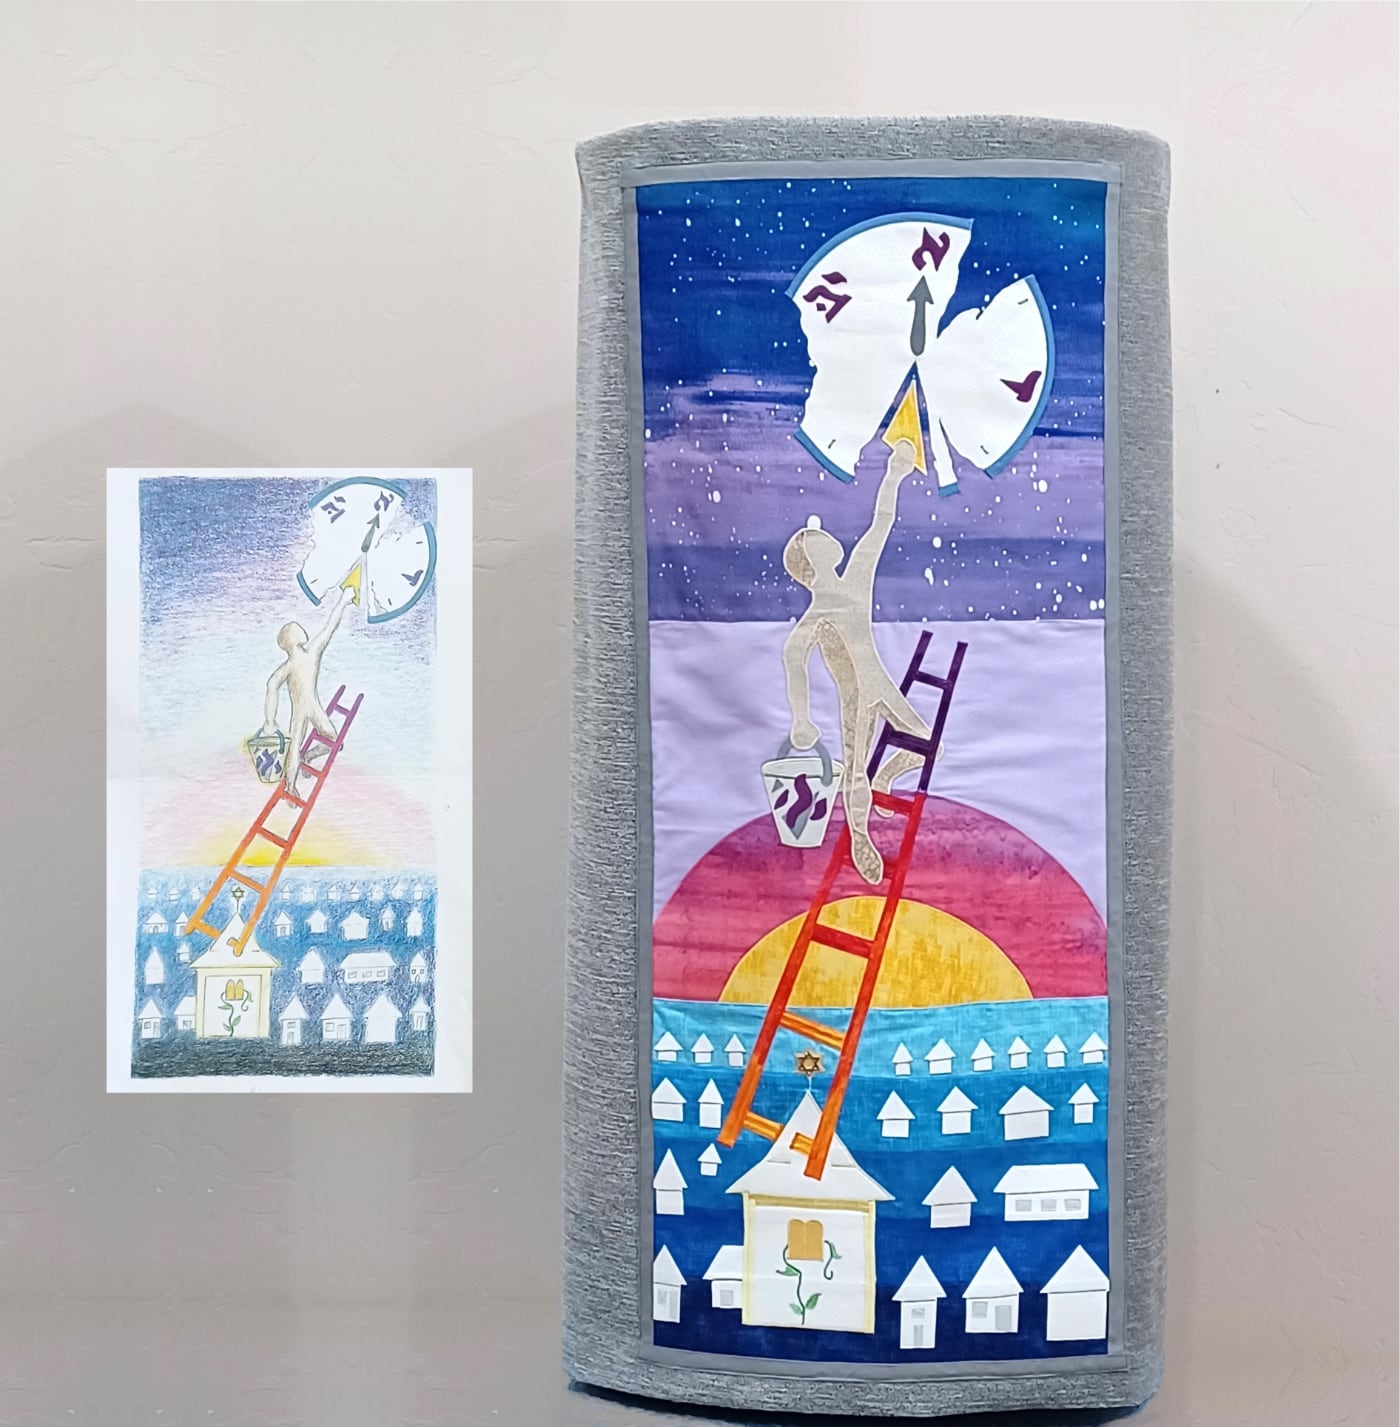 Torah cover artwork and finished torah cover side by side